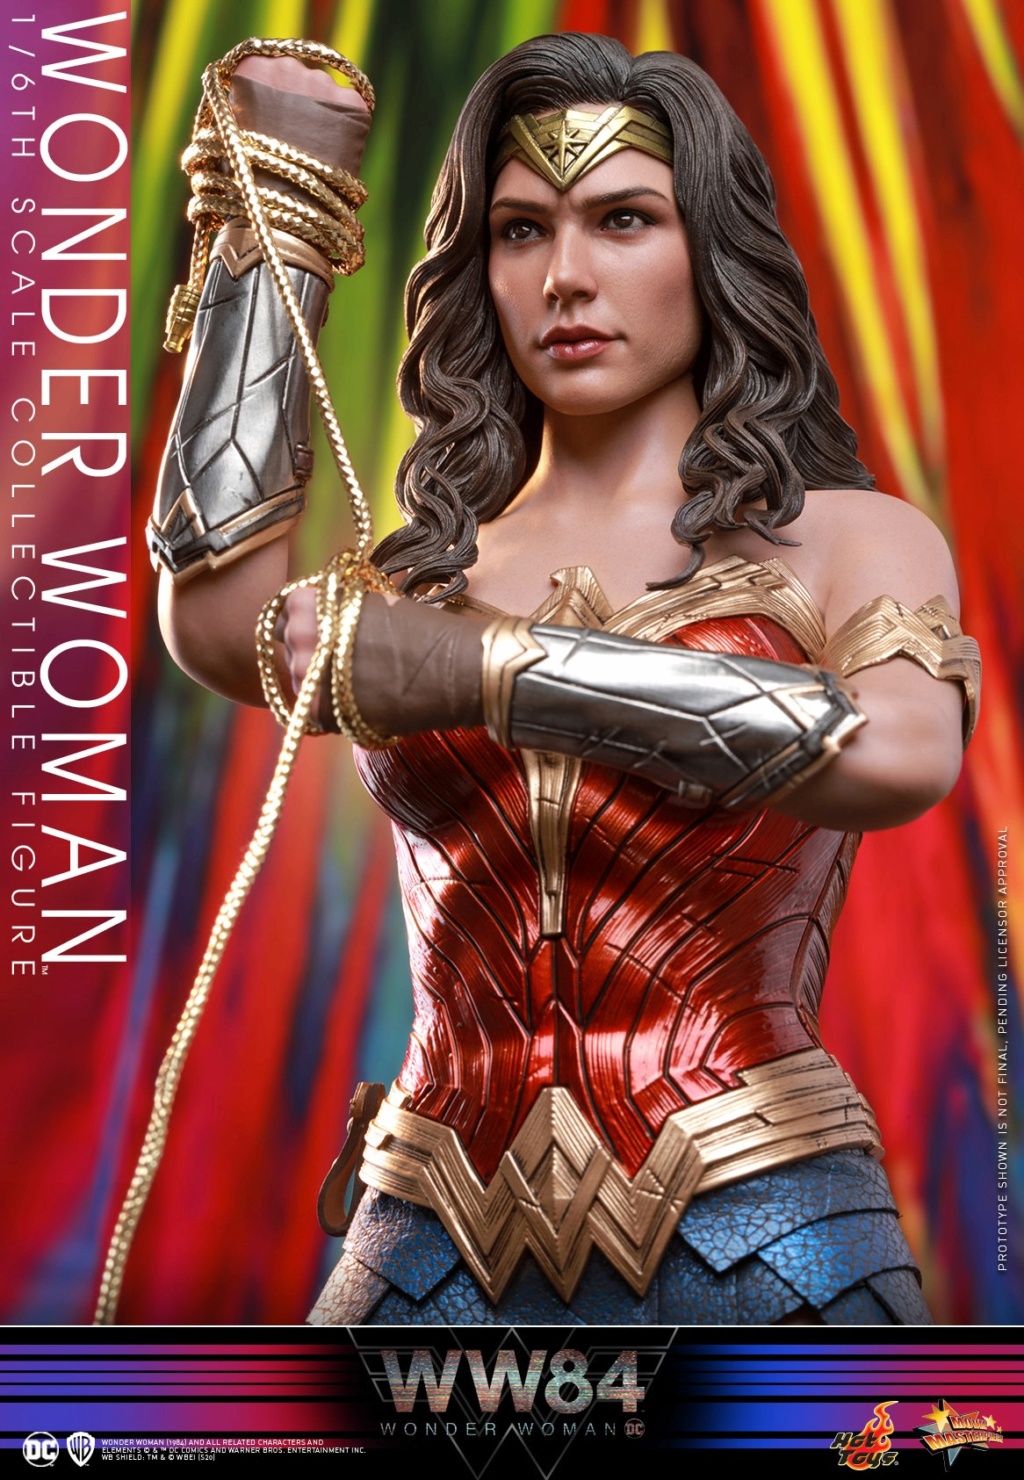 DC - NEW PRODUCT: HOT TOYS: WONDER WOMAN 1984 WONDER WOMAN 1/6TH SCALE COLLECTIBLE FIGURE 10284